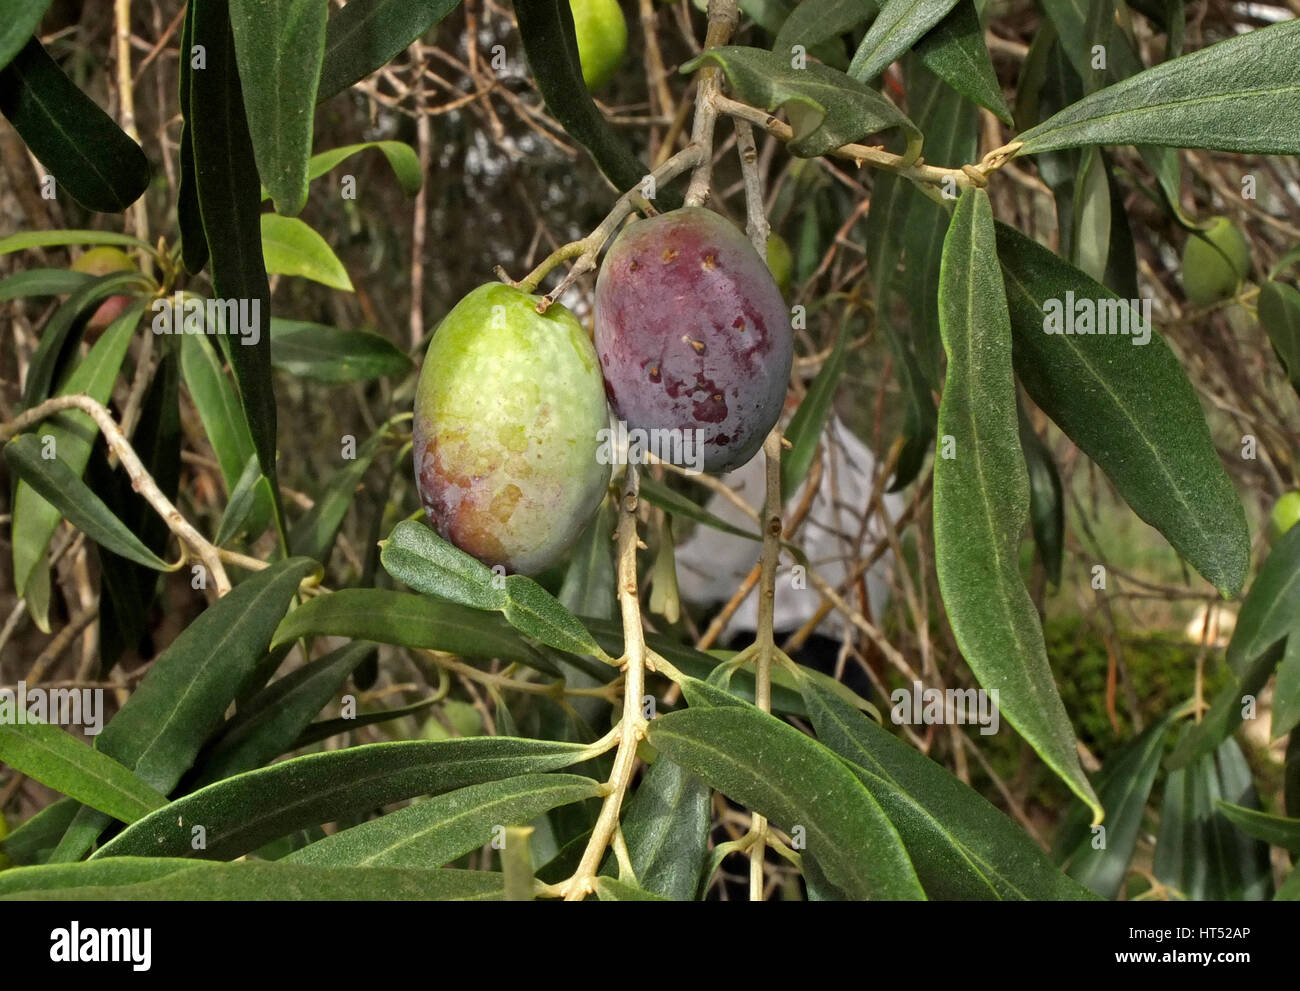 Olives from Sardinia. The main ingredient of the new anti-wrinkle cream by Chanel maison Stock Photo